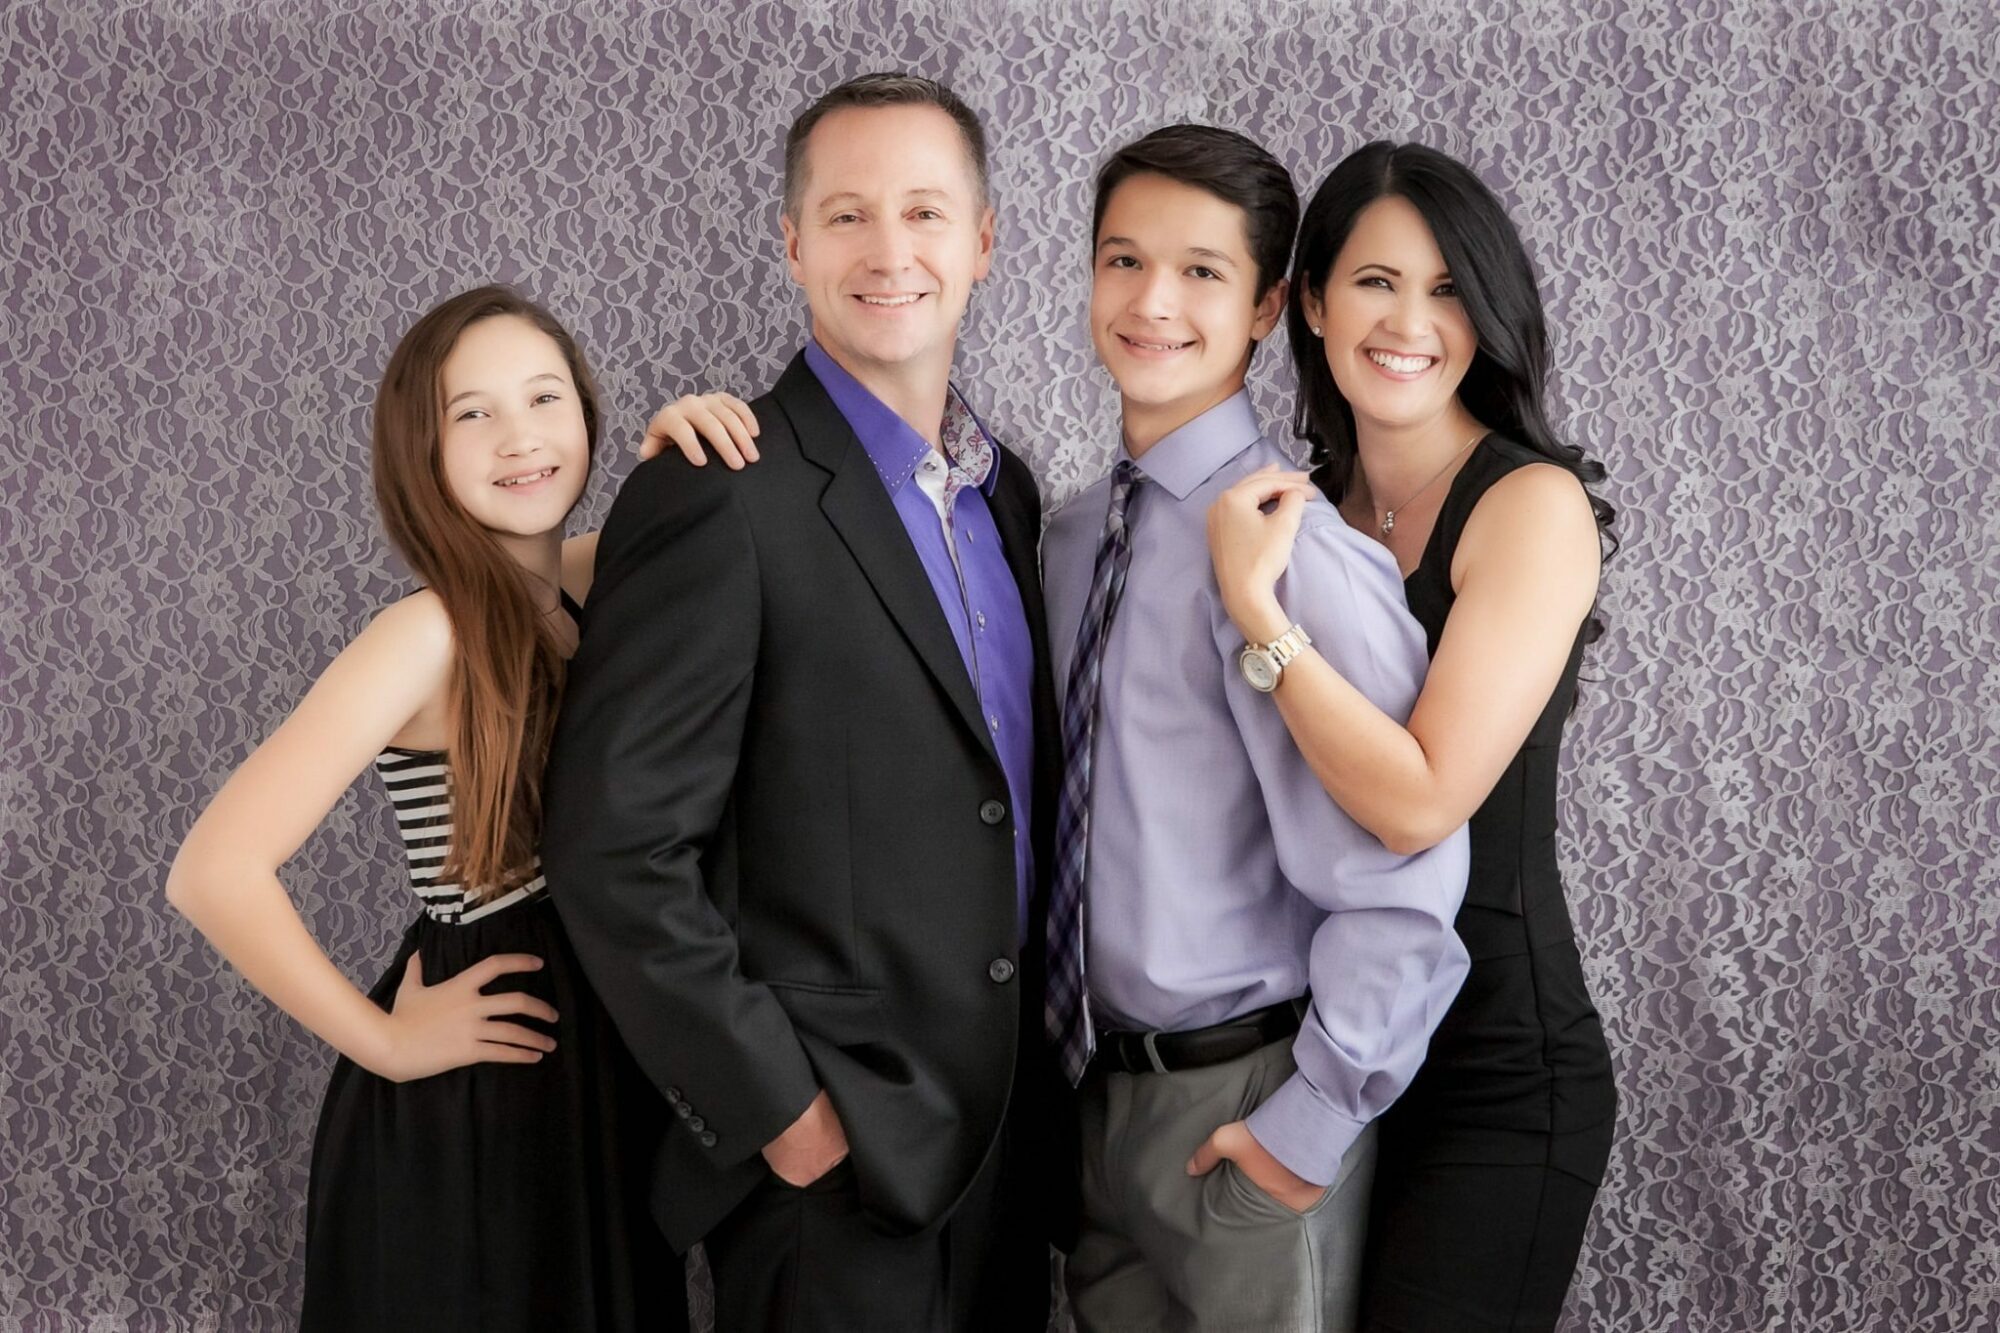 Find Out More About Sincerely Schlickart Family Sessions